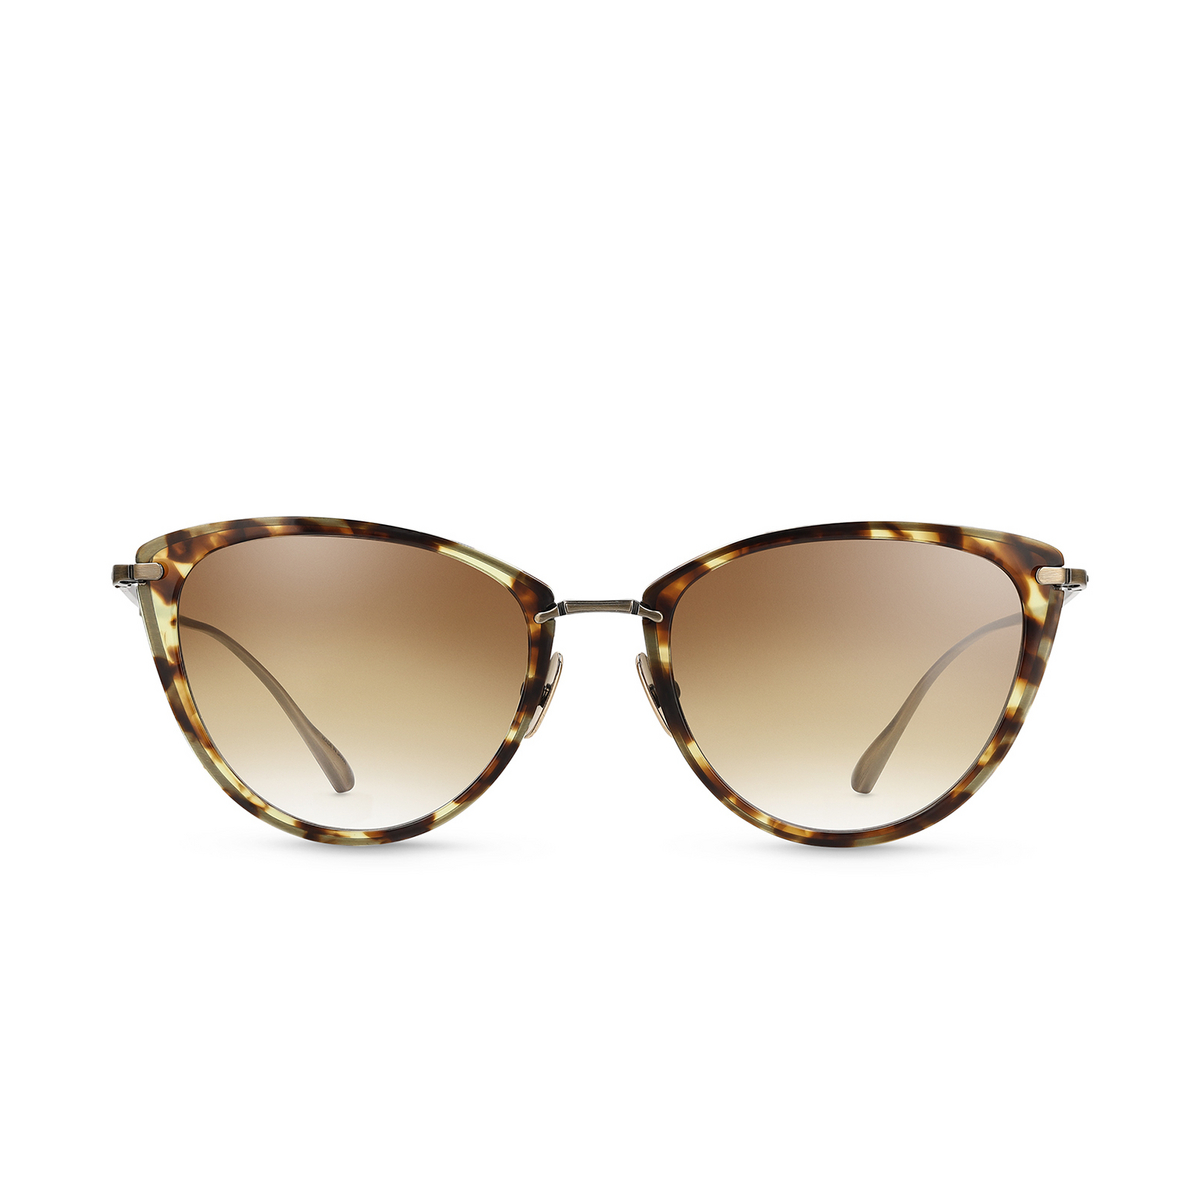 Mr. Leight® Butterfly Sunglasses: Beverly S color Tort-atg/wbg - front view.